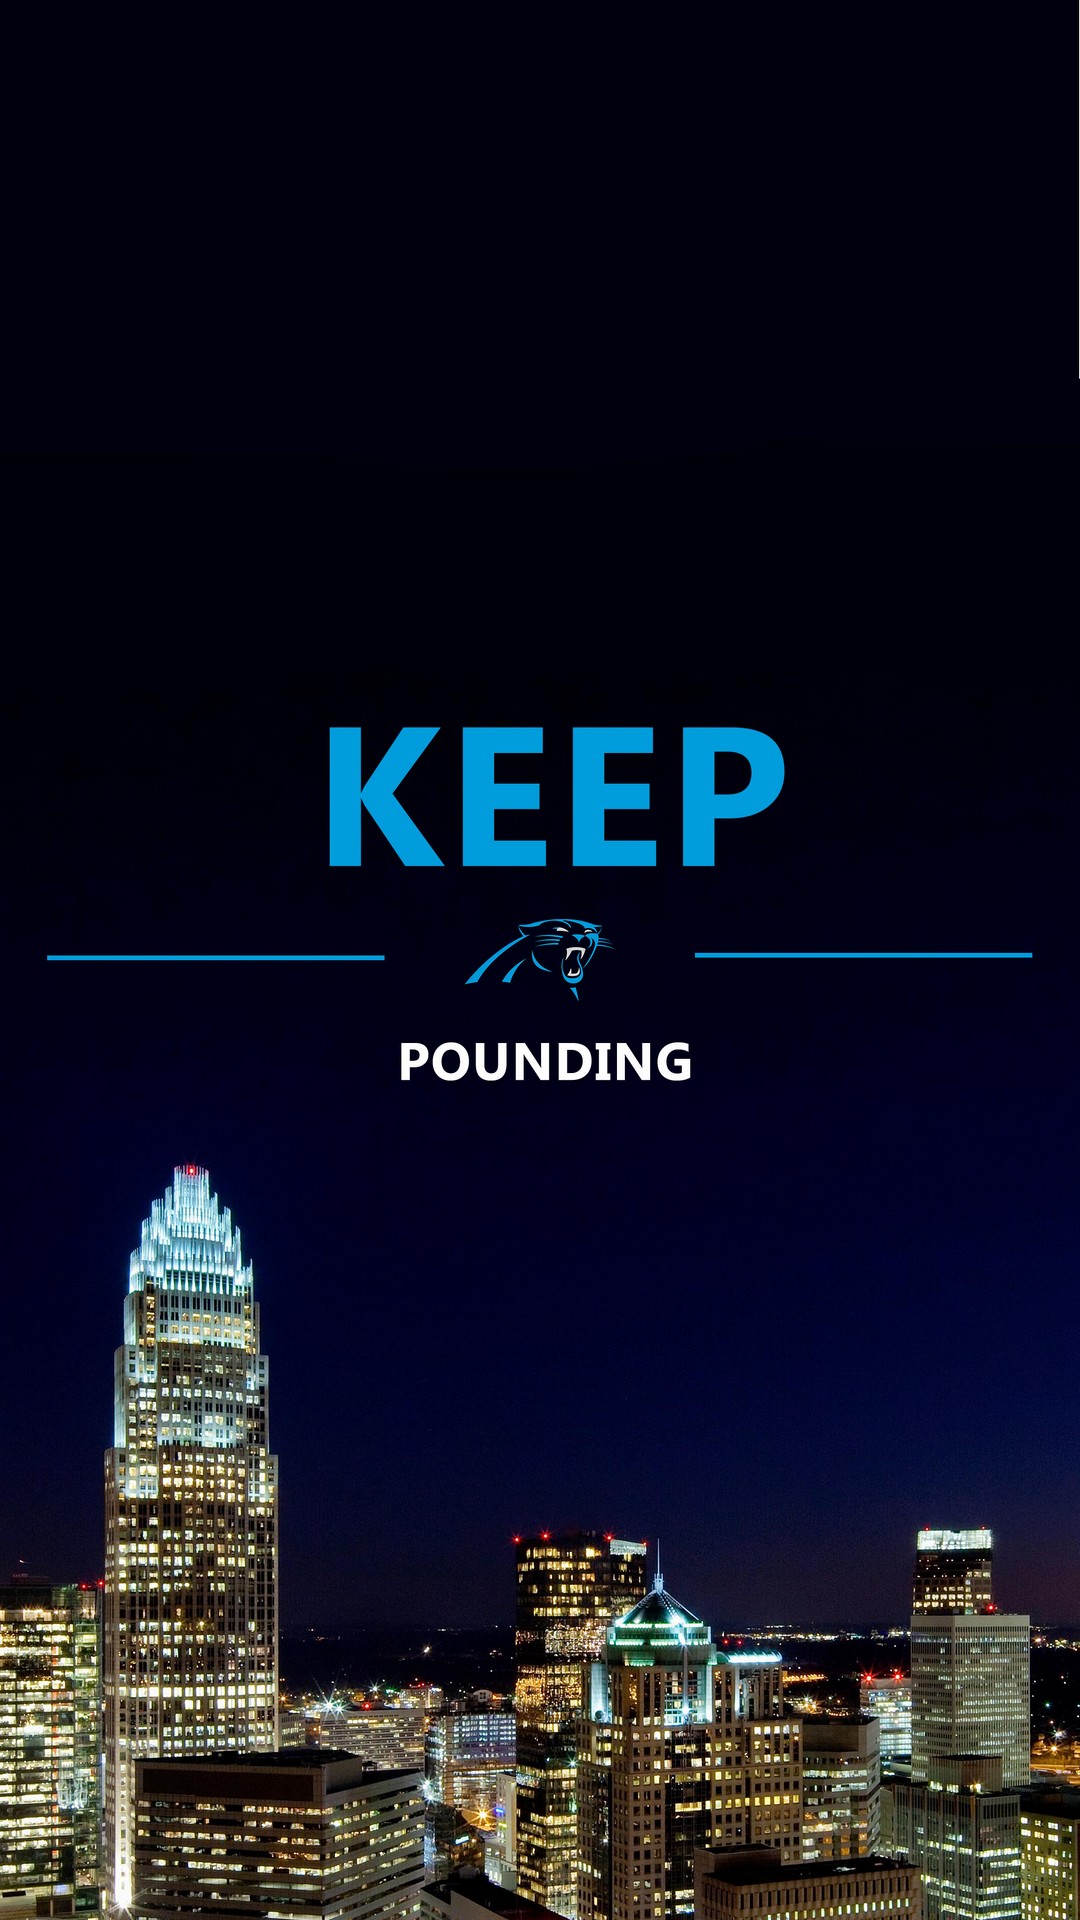 Carolina Panthers iPhone Wallpaper in HD with high-resolution 1080x1920 pixel. Download and set as wallpaper for Apple iPhone X, XS Max, XR, 8, 7, 6, SE, iPad, Android